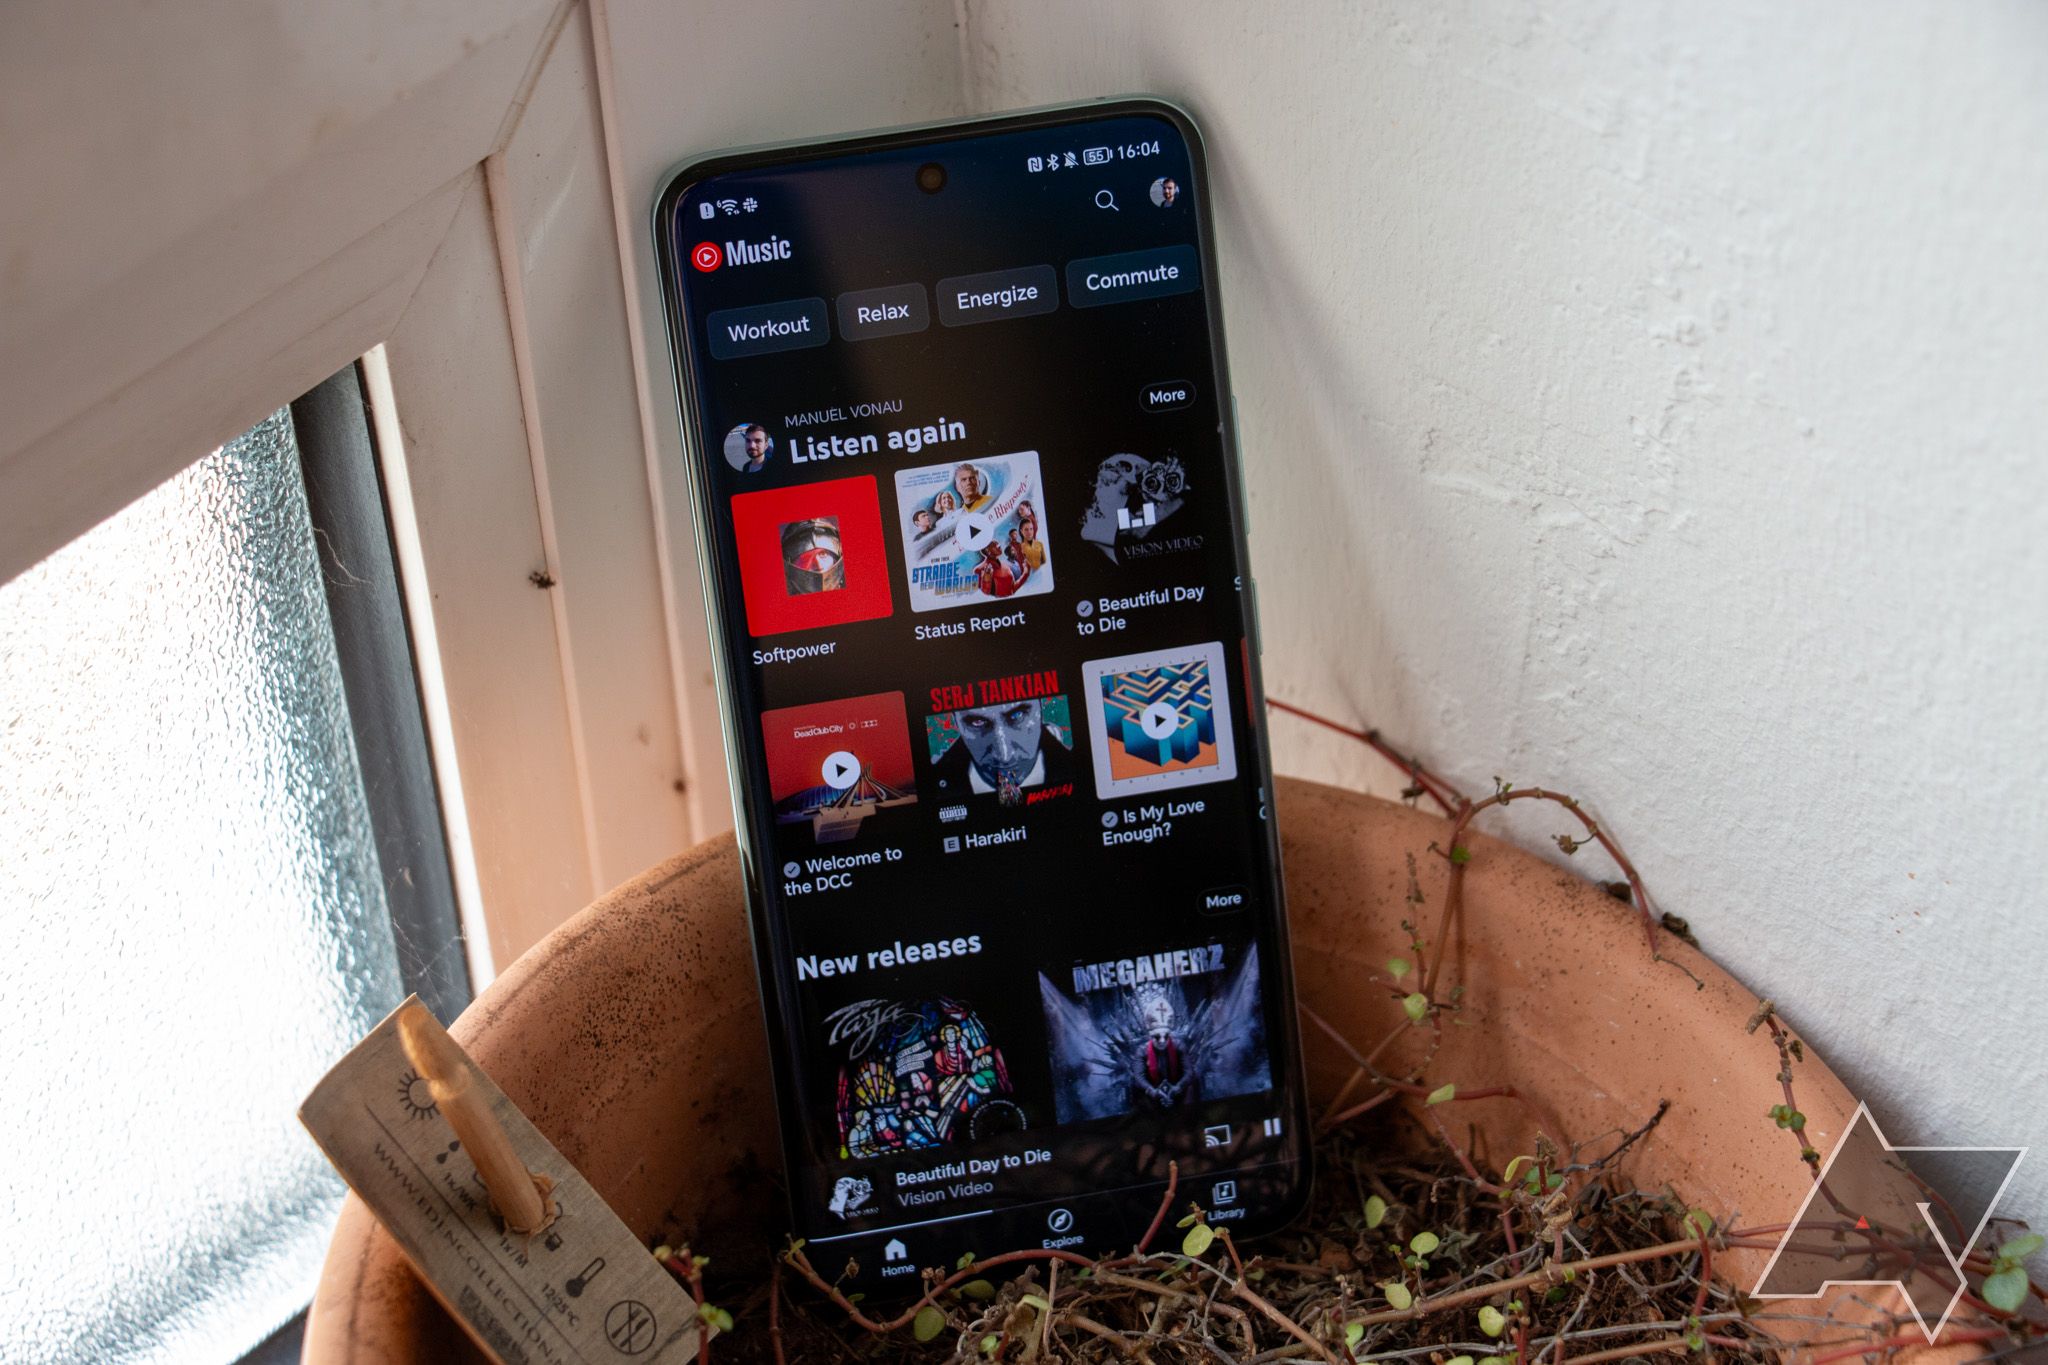 The YouTube Music home screen on an Android phone resting in a clay pot.